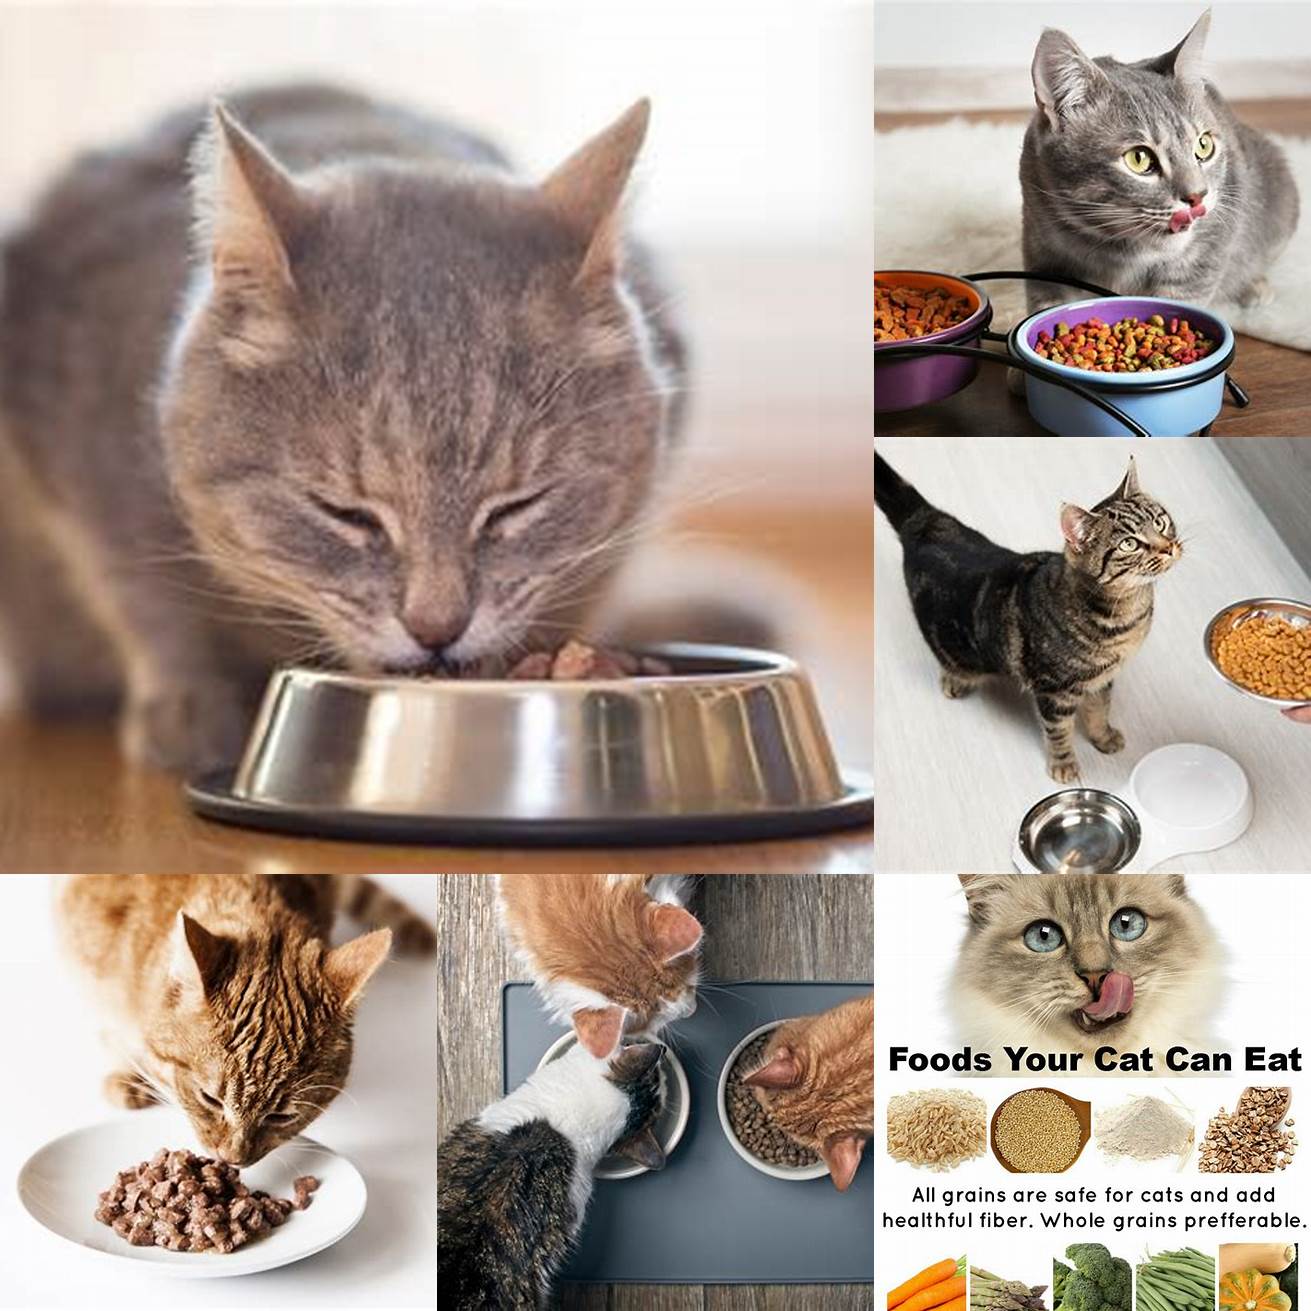 Feed your cat a healthy diet